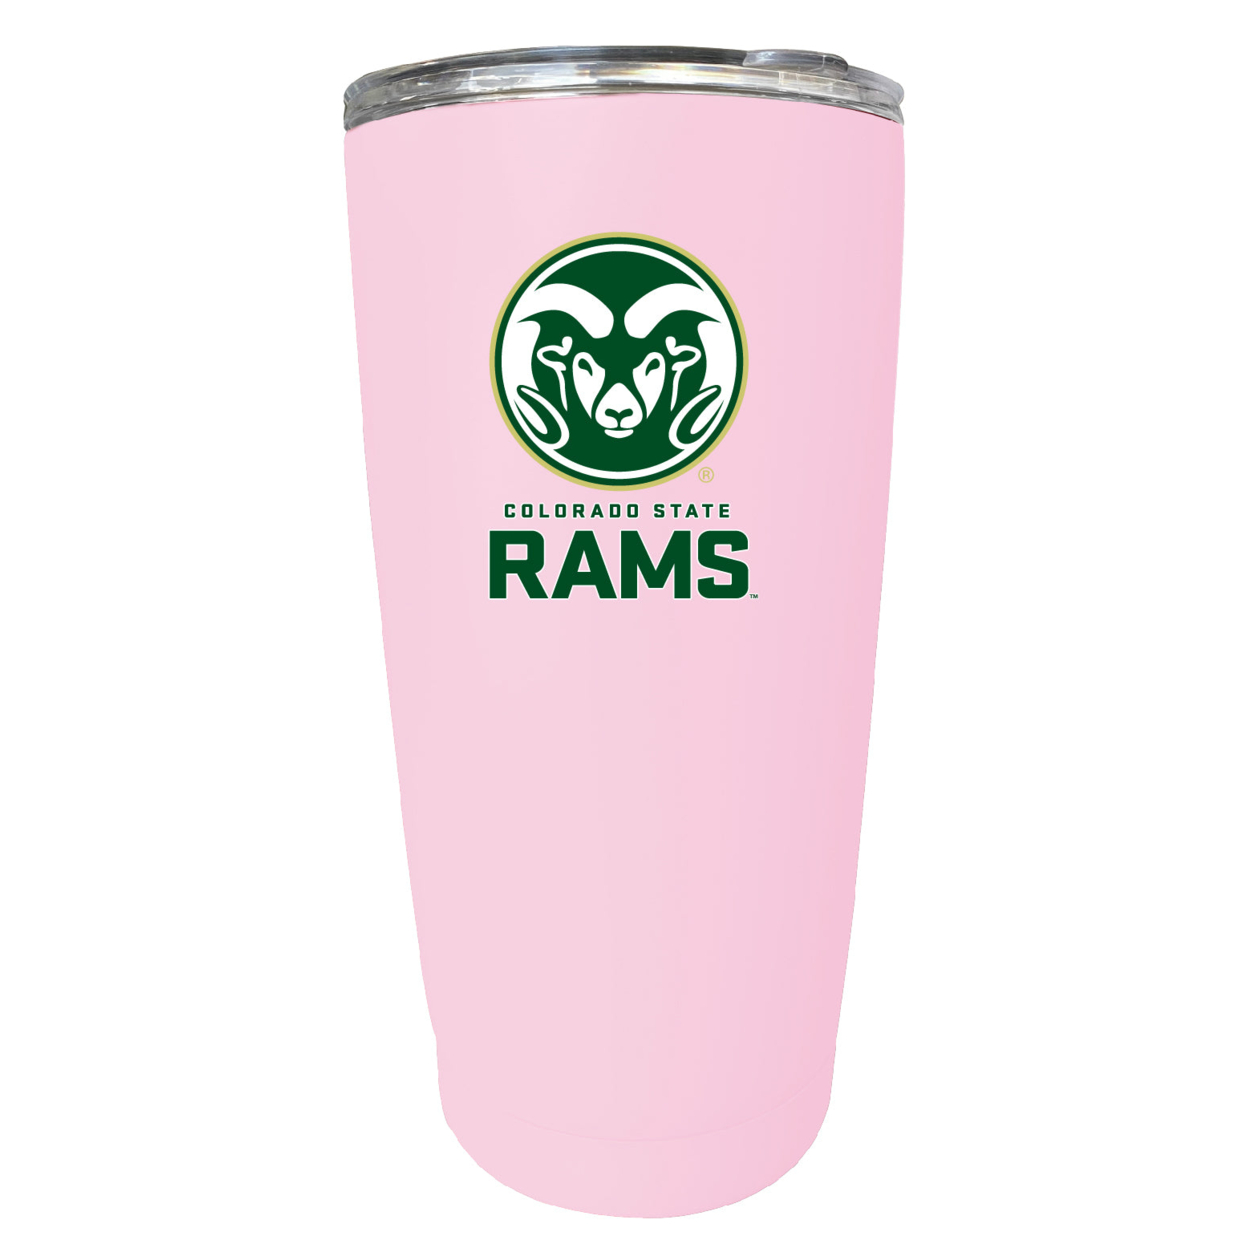 Colorado State Rams 16 Oz Stainless Steel Insulated Tumbler - Pink